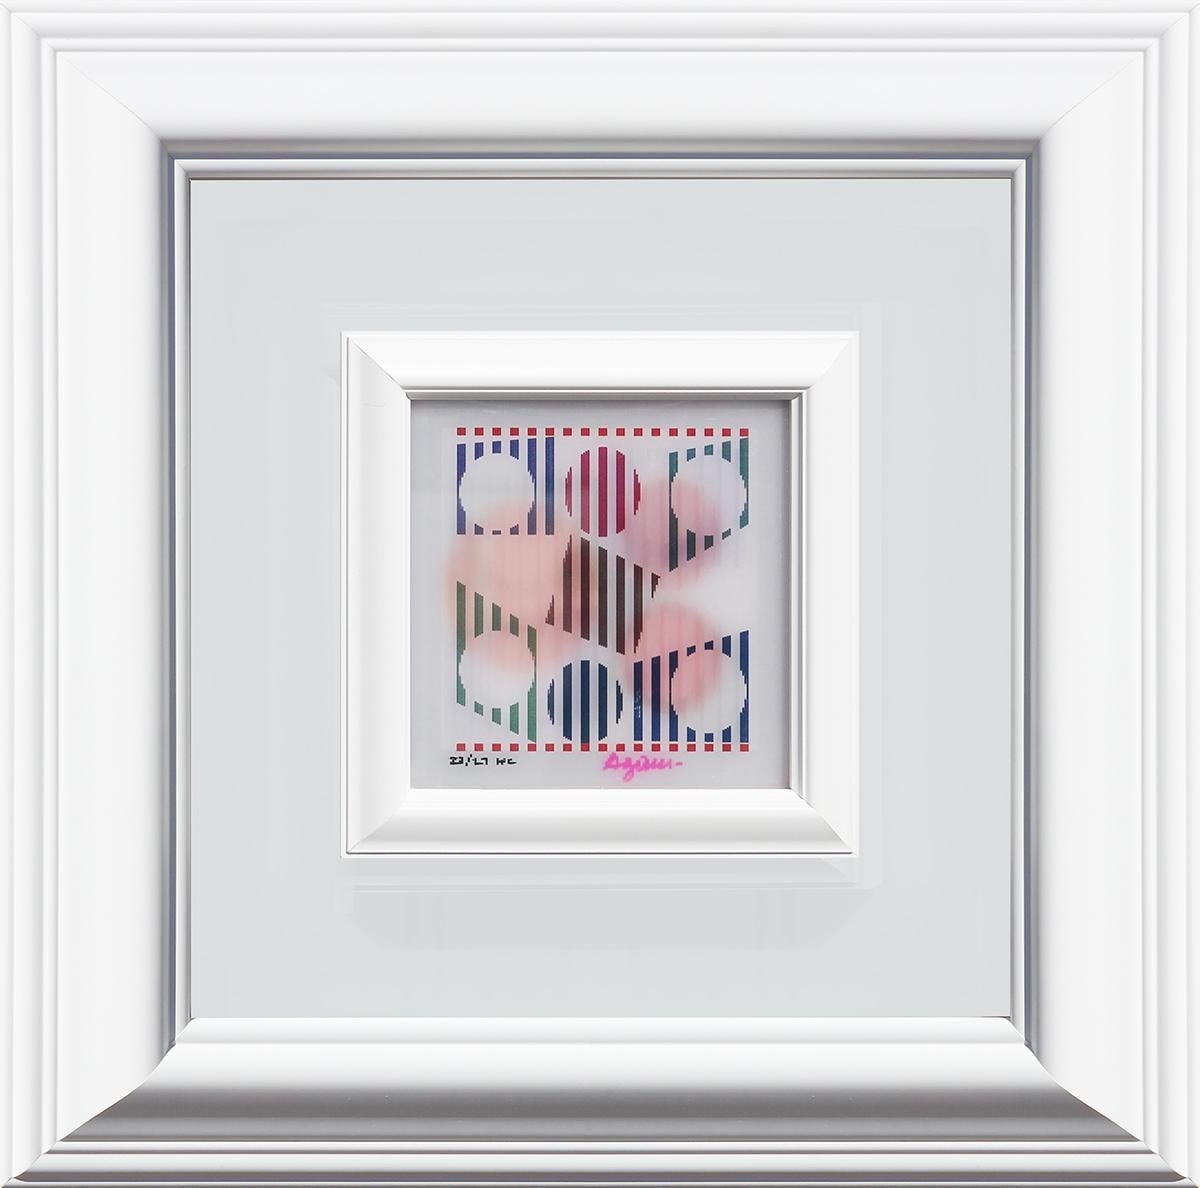 “Curb 2+4” Colorful Abstract Geometric Lenticular Agamograph Edition 22/27 - Gray Abstract Print by Yaacov Agam